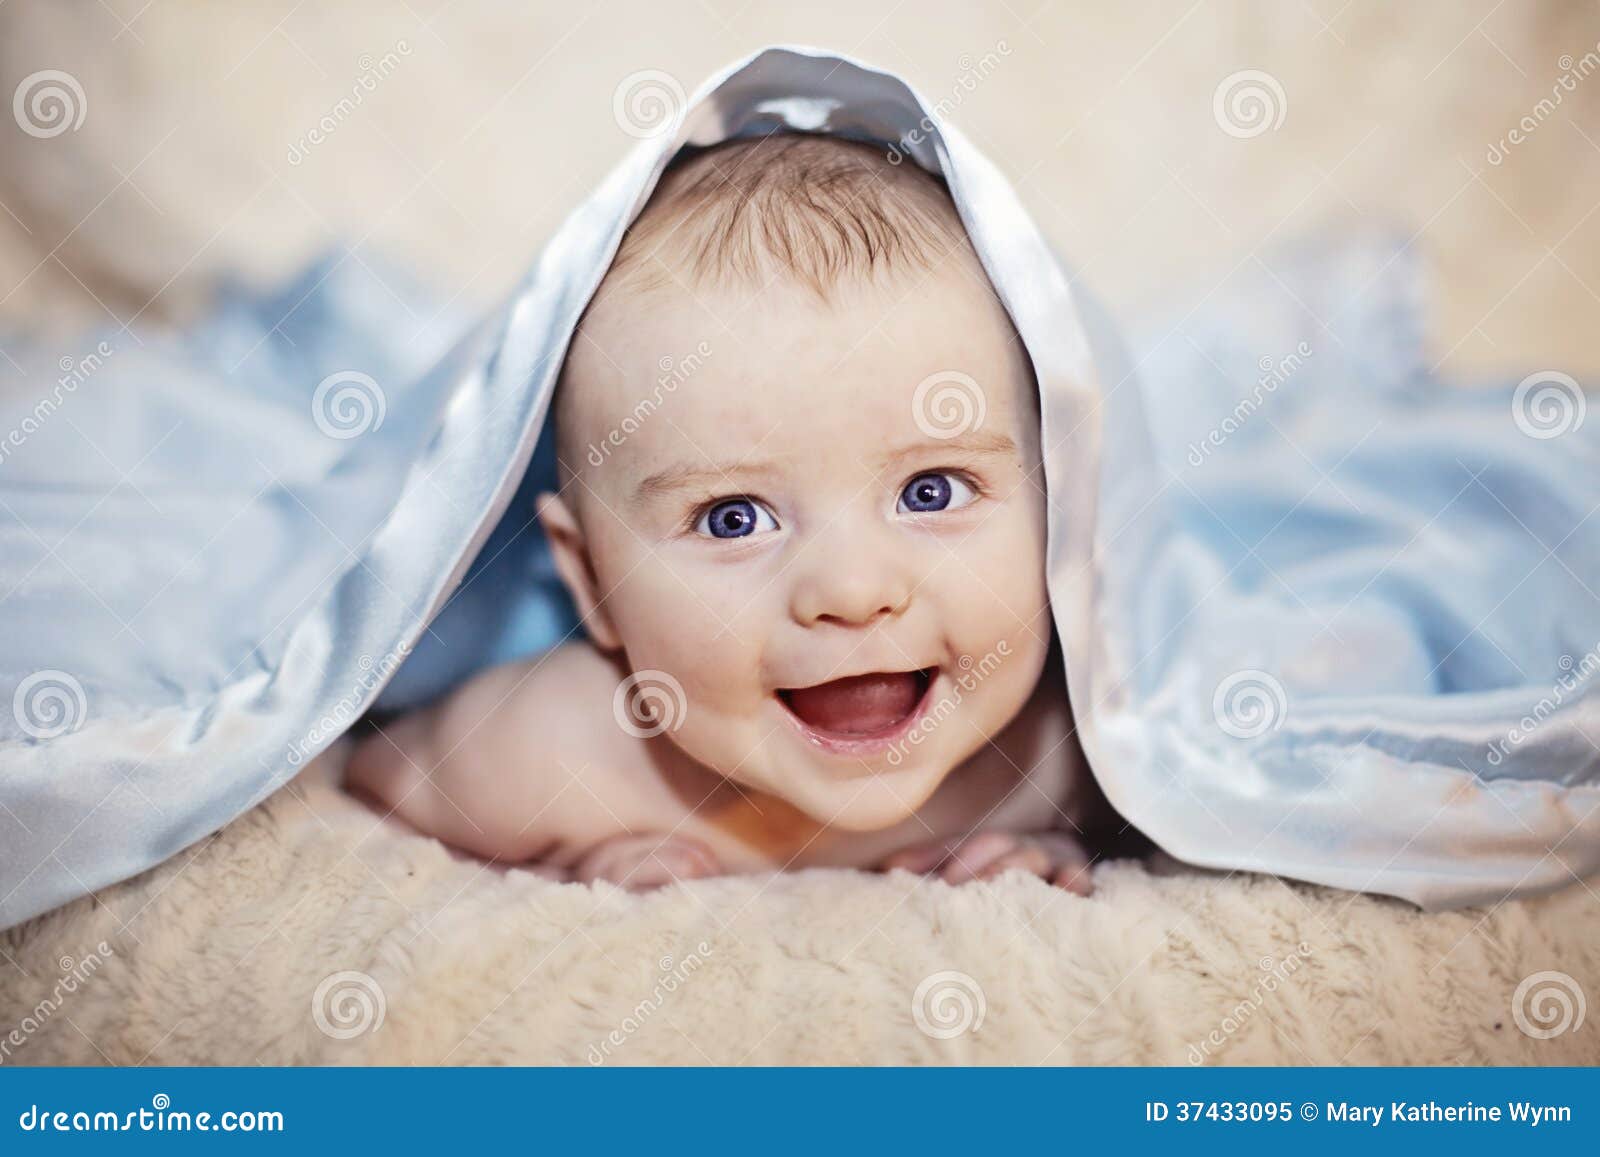 baby free images